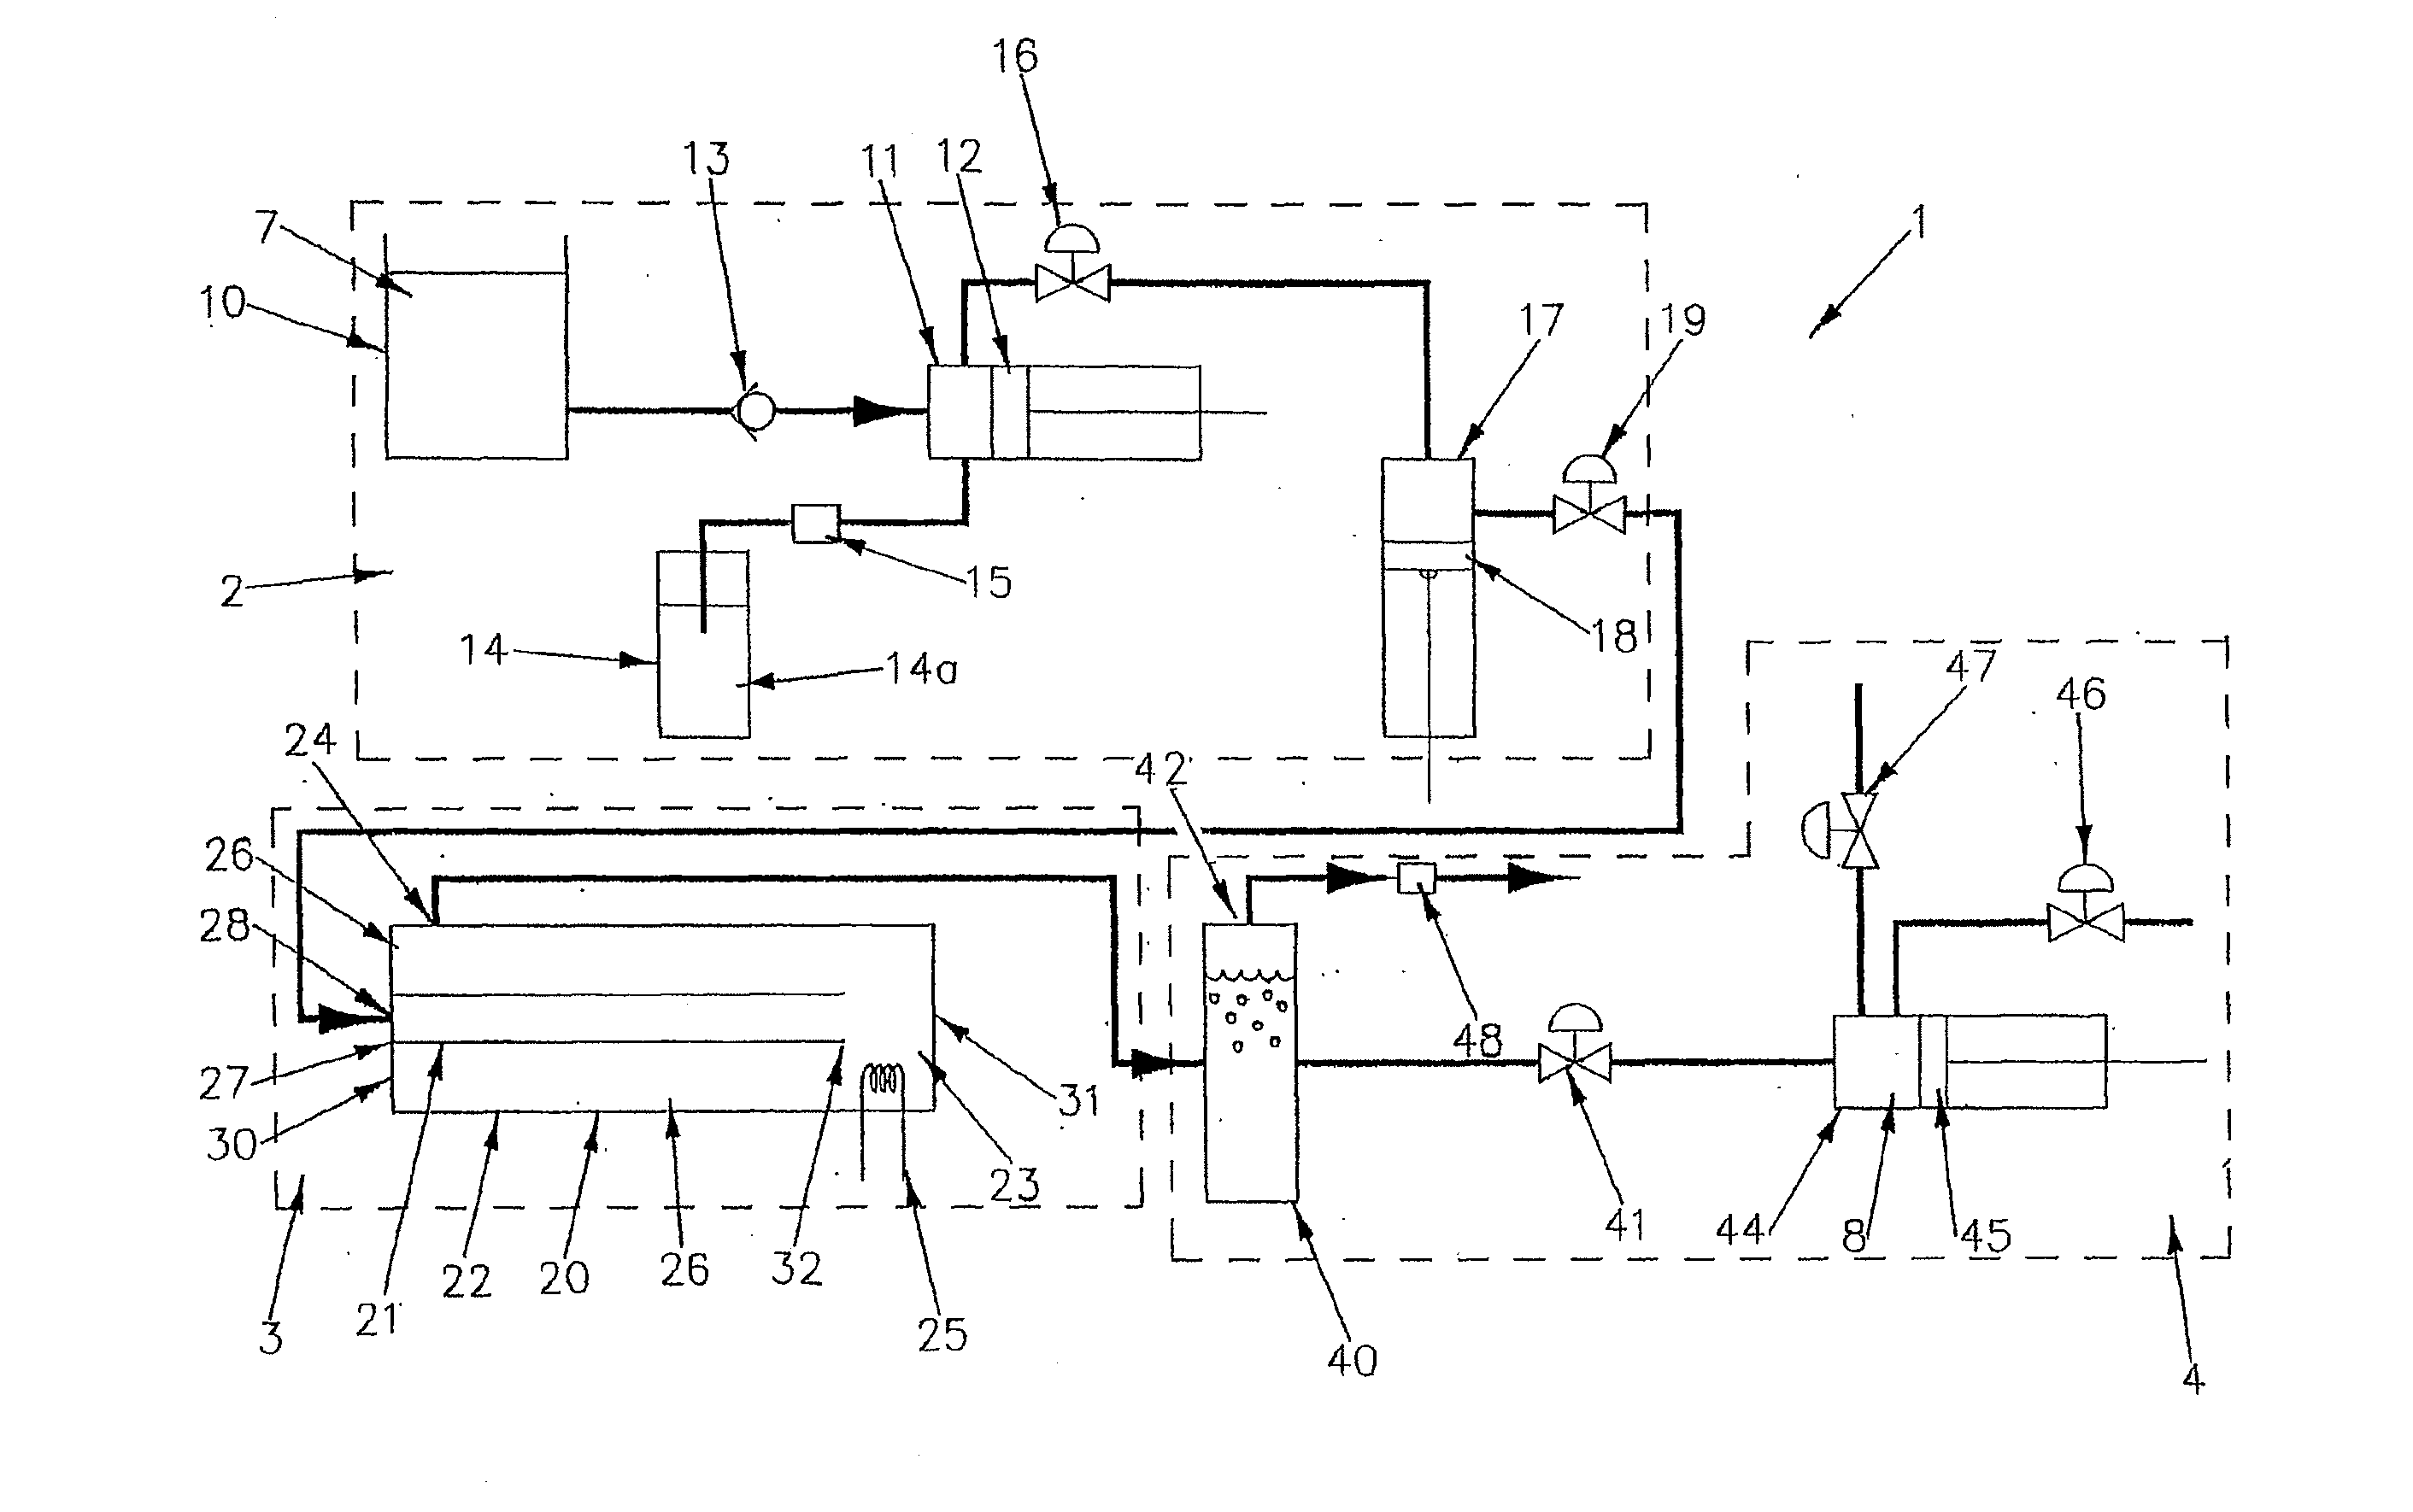 System and process for the treatment of raw material